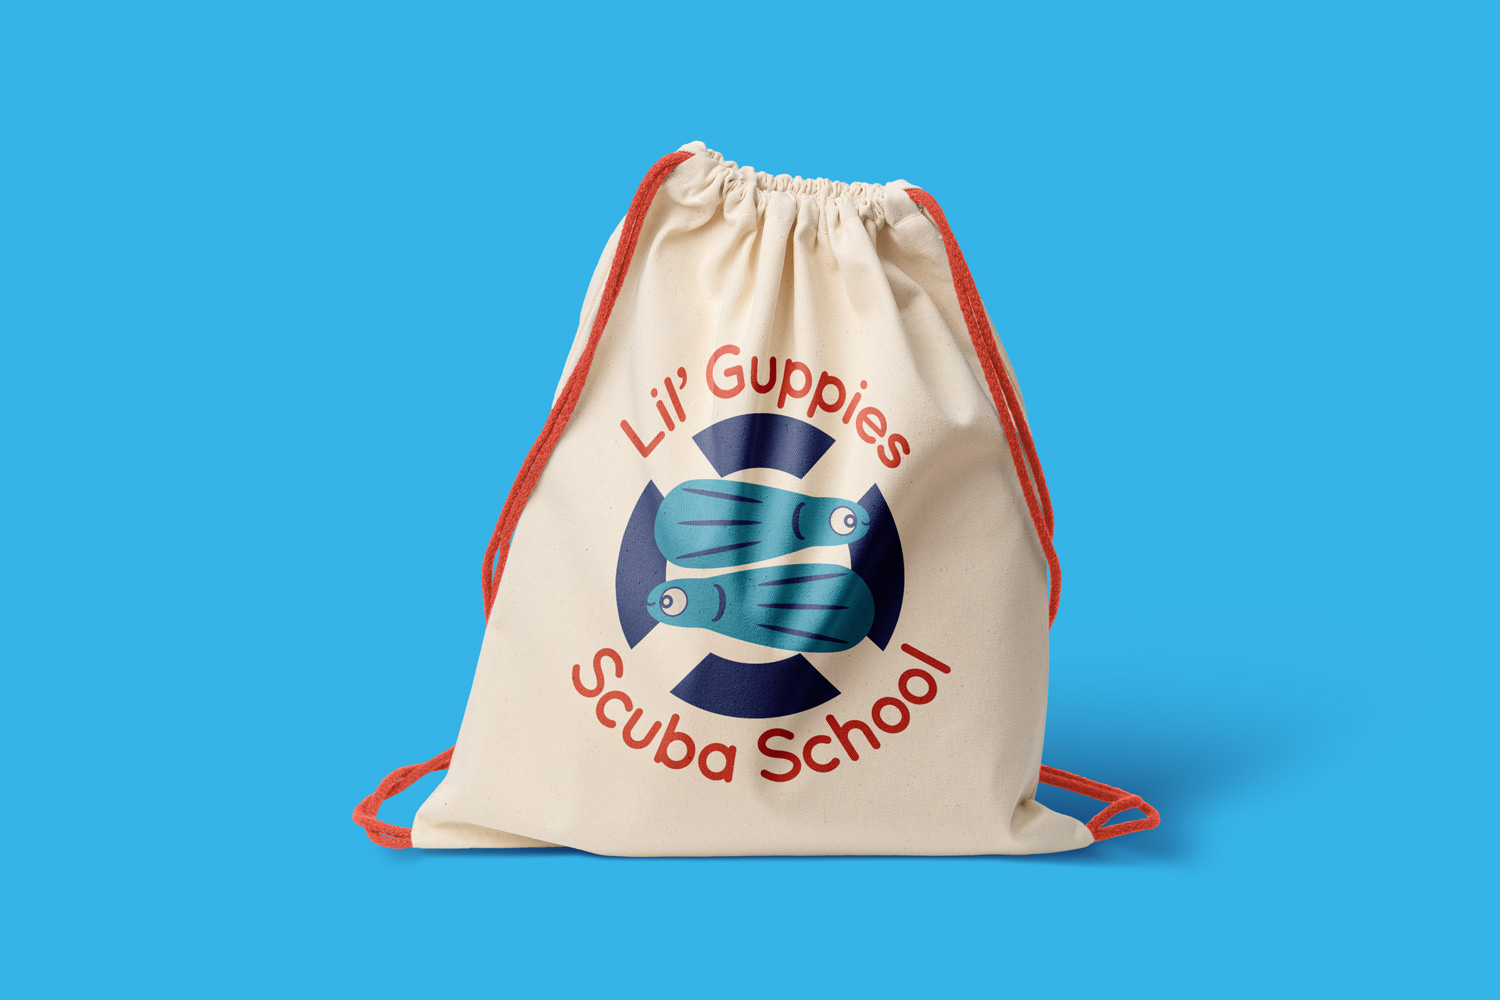 Lil' Guppies white backpack on blue background